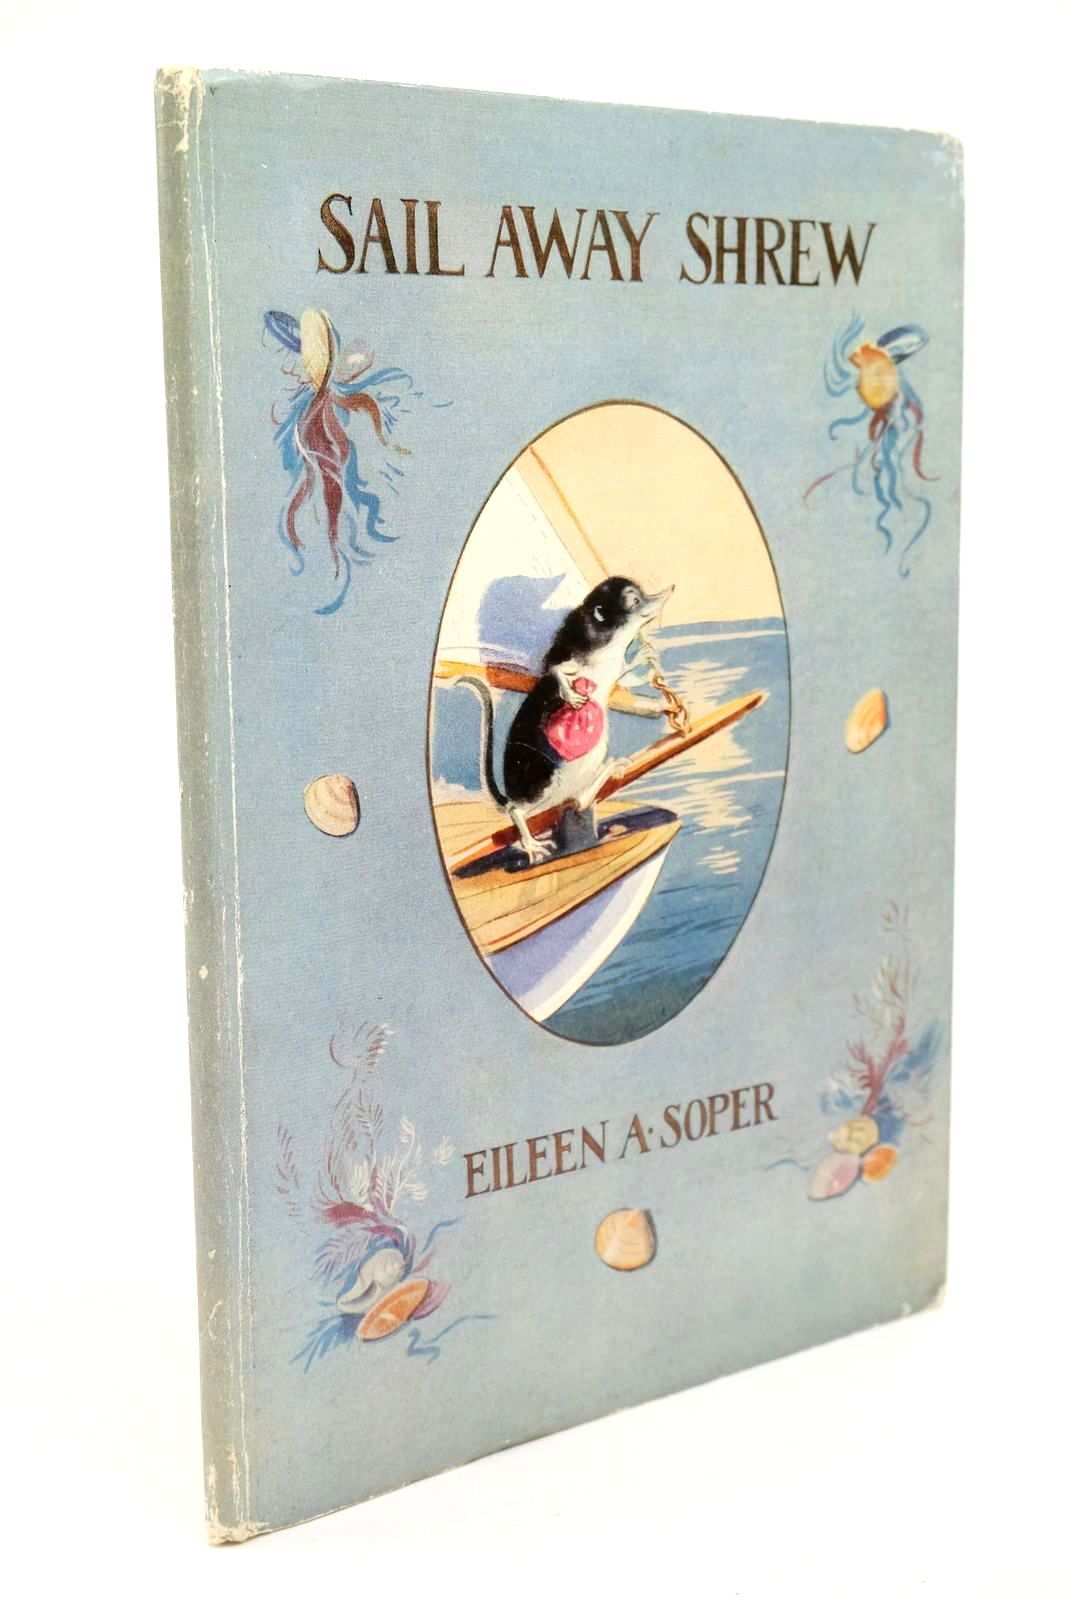 Photo of SAIL AWAY SHREW written by Soper, Eileen illustrated by Soper, Eileen published by Macmillan & Co. Ltd. (STOCK CODE: 1322925)  for sale by Stella & Rose's Books